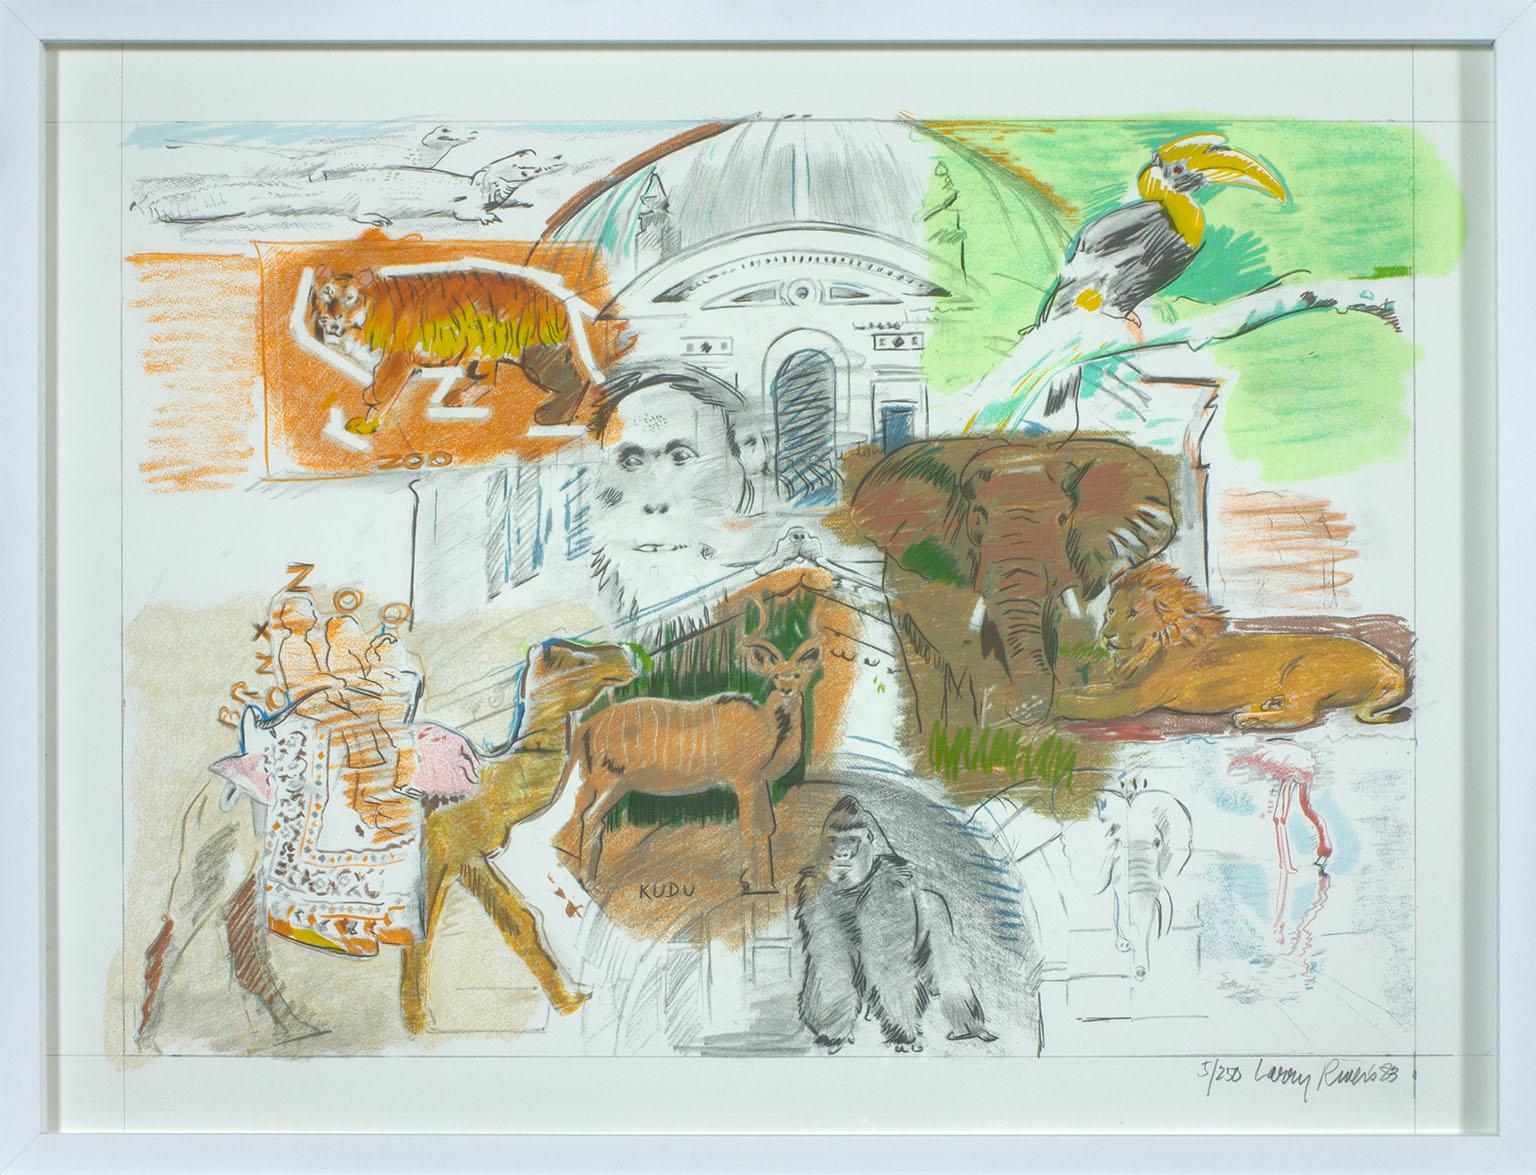 "Bronx Zoo" lithograph and silk screen by Larry Rivers from "New York, New York"